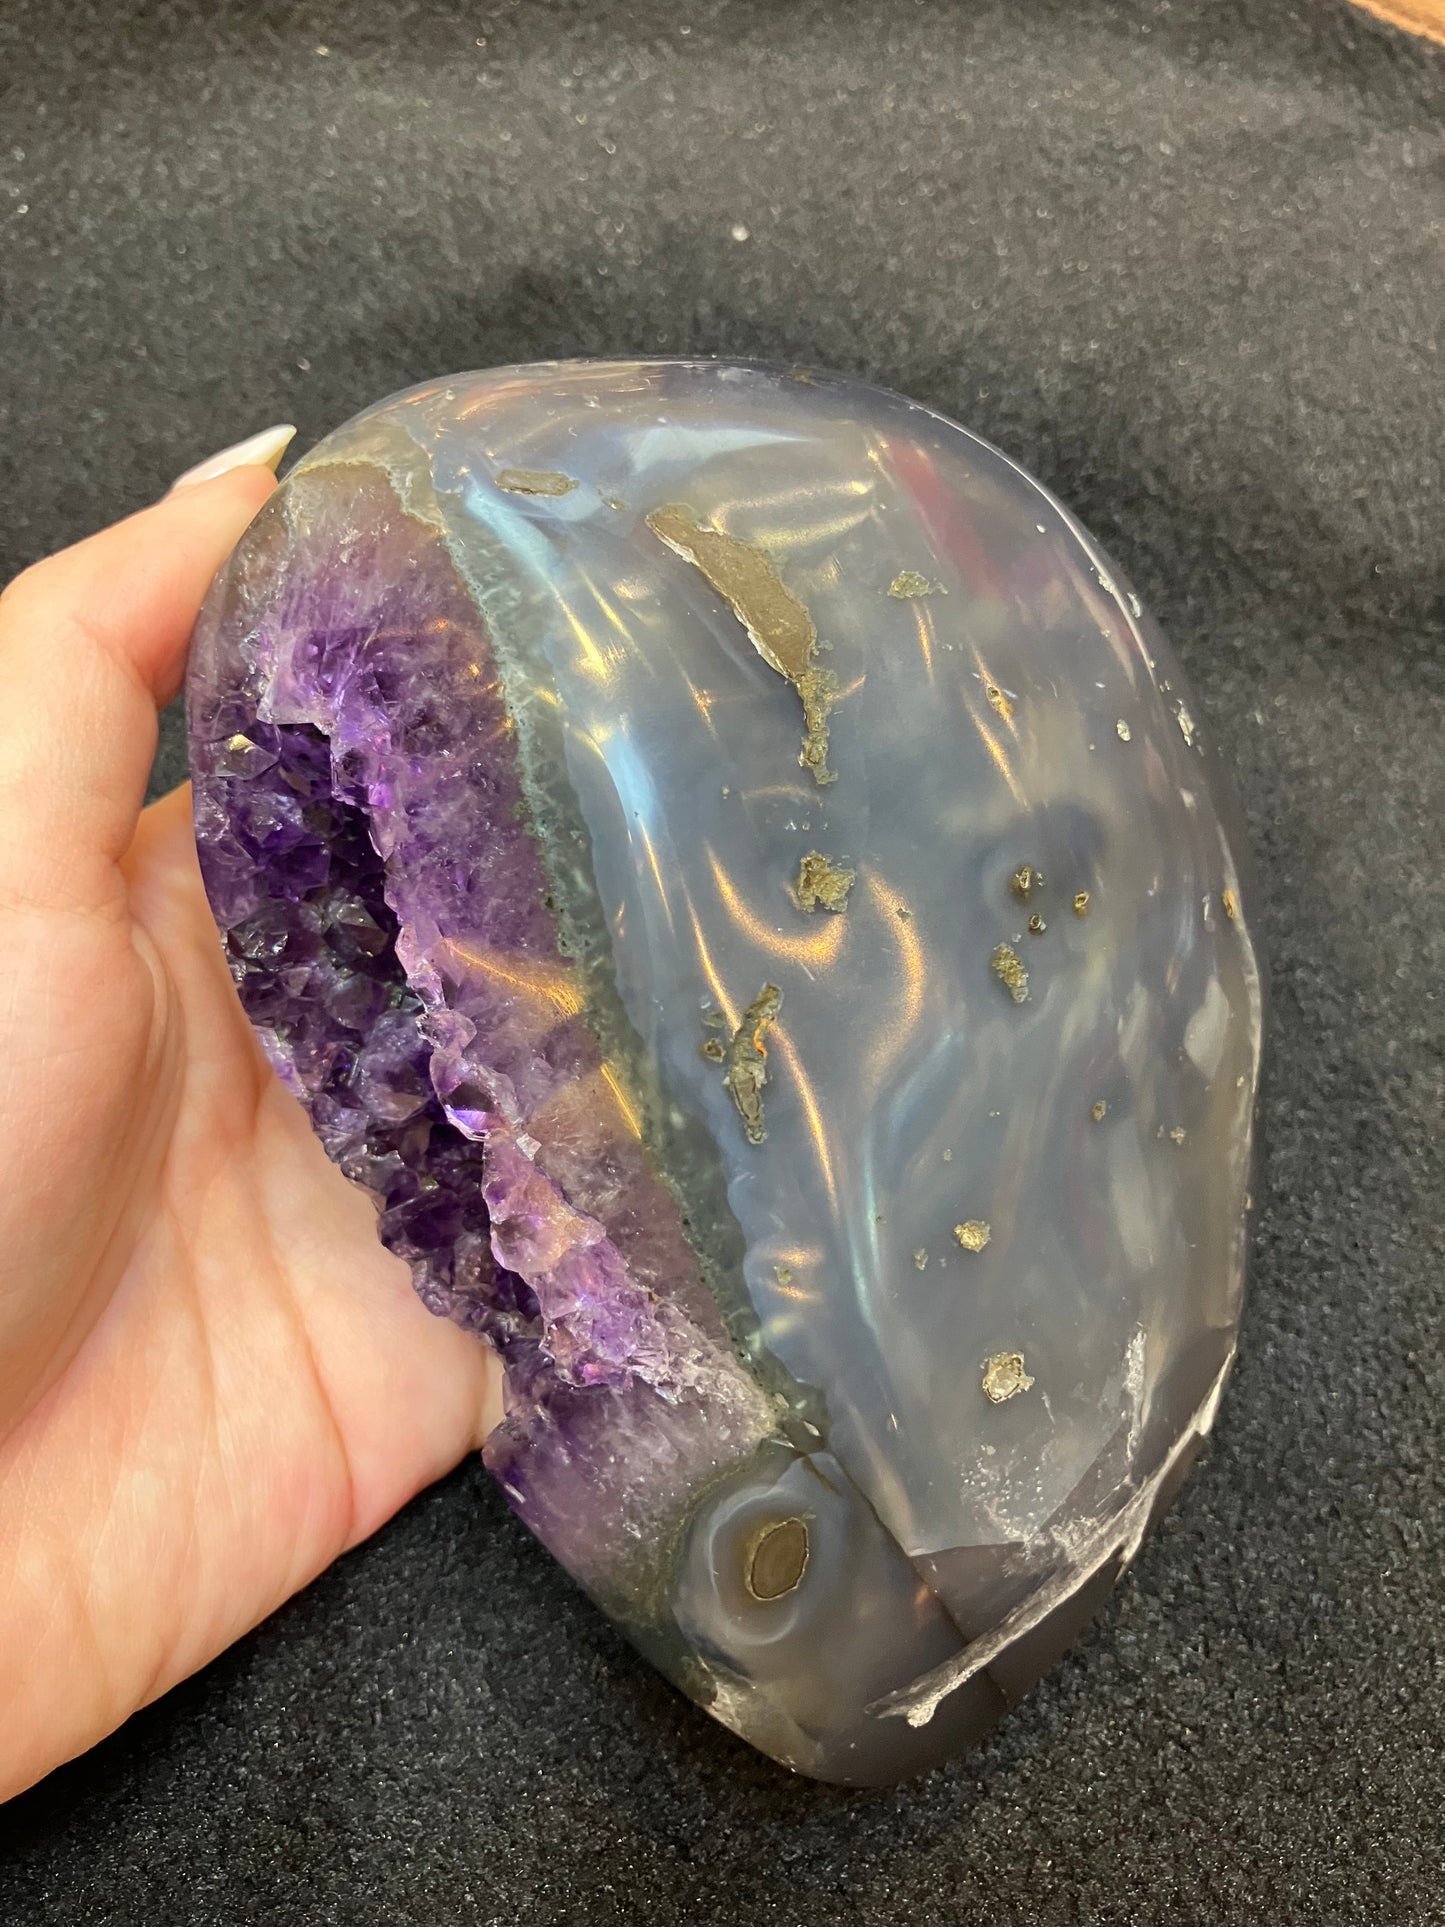 *RARE AGATE SHELL* 1070g Natural Uruguay Amethyst Geode Fengshui Display with Wooden Base